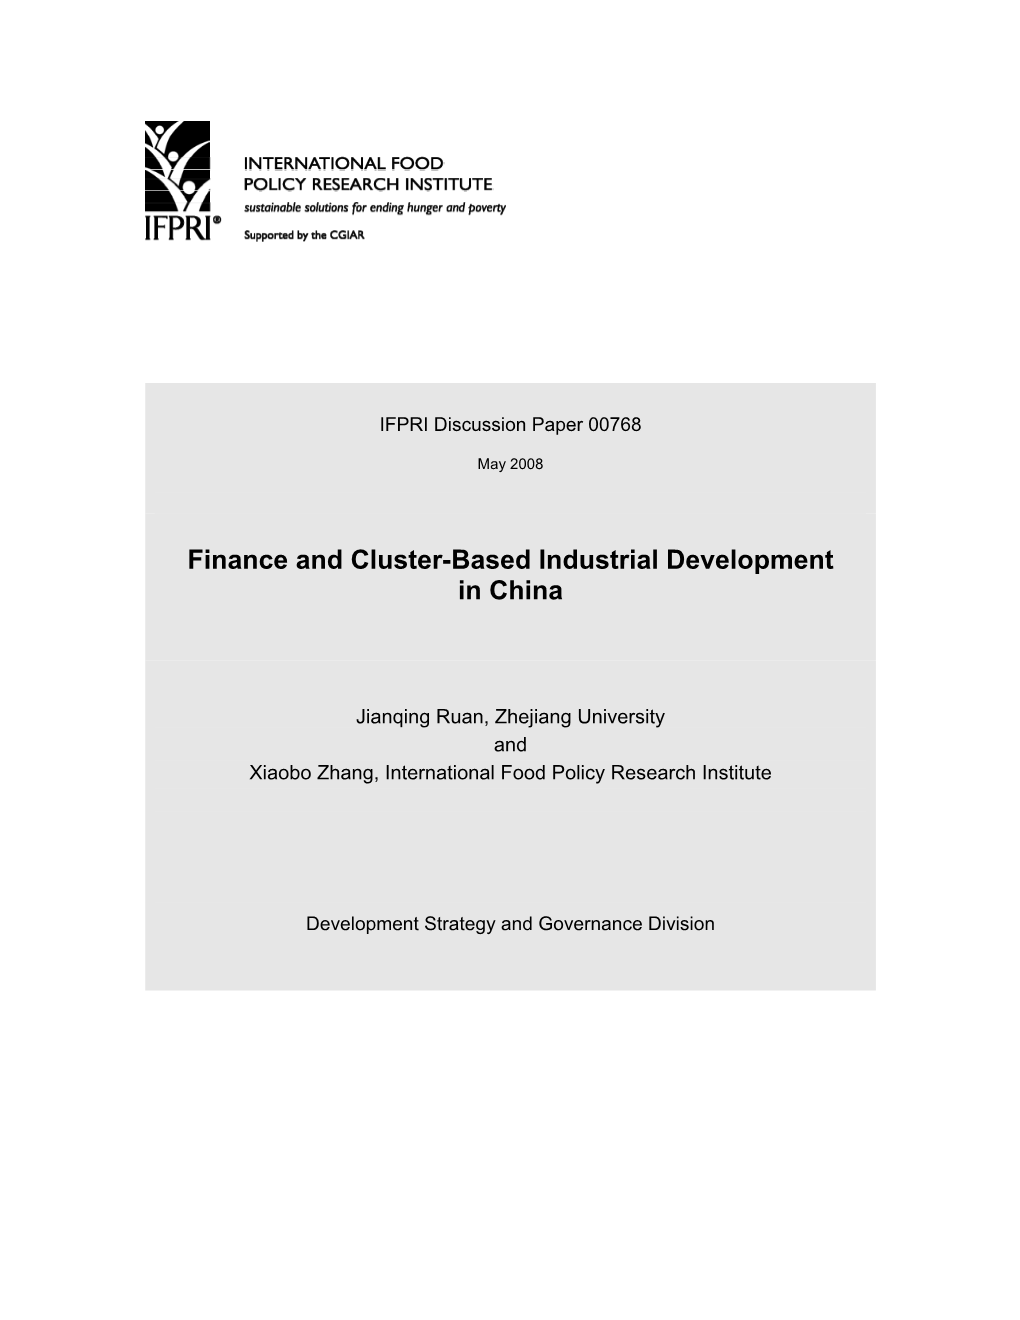 Finance and Cluster-Based Industrial Development in China